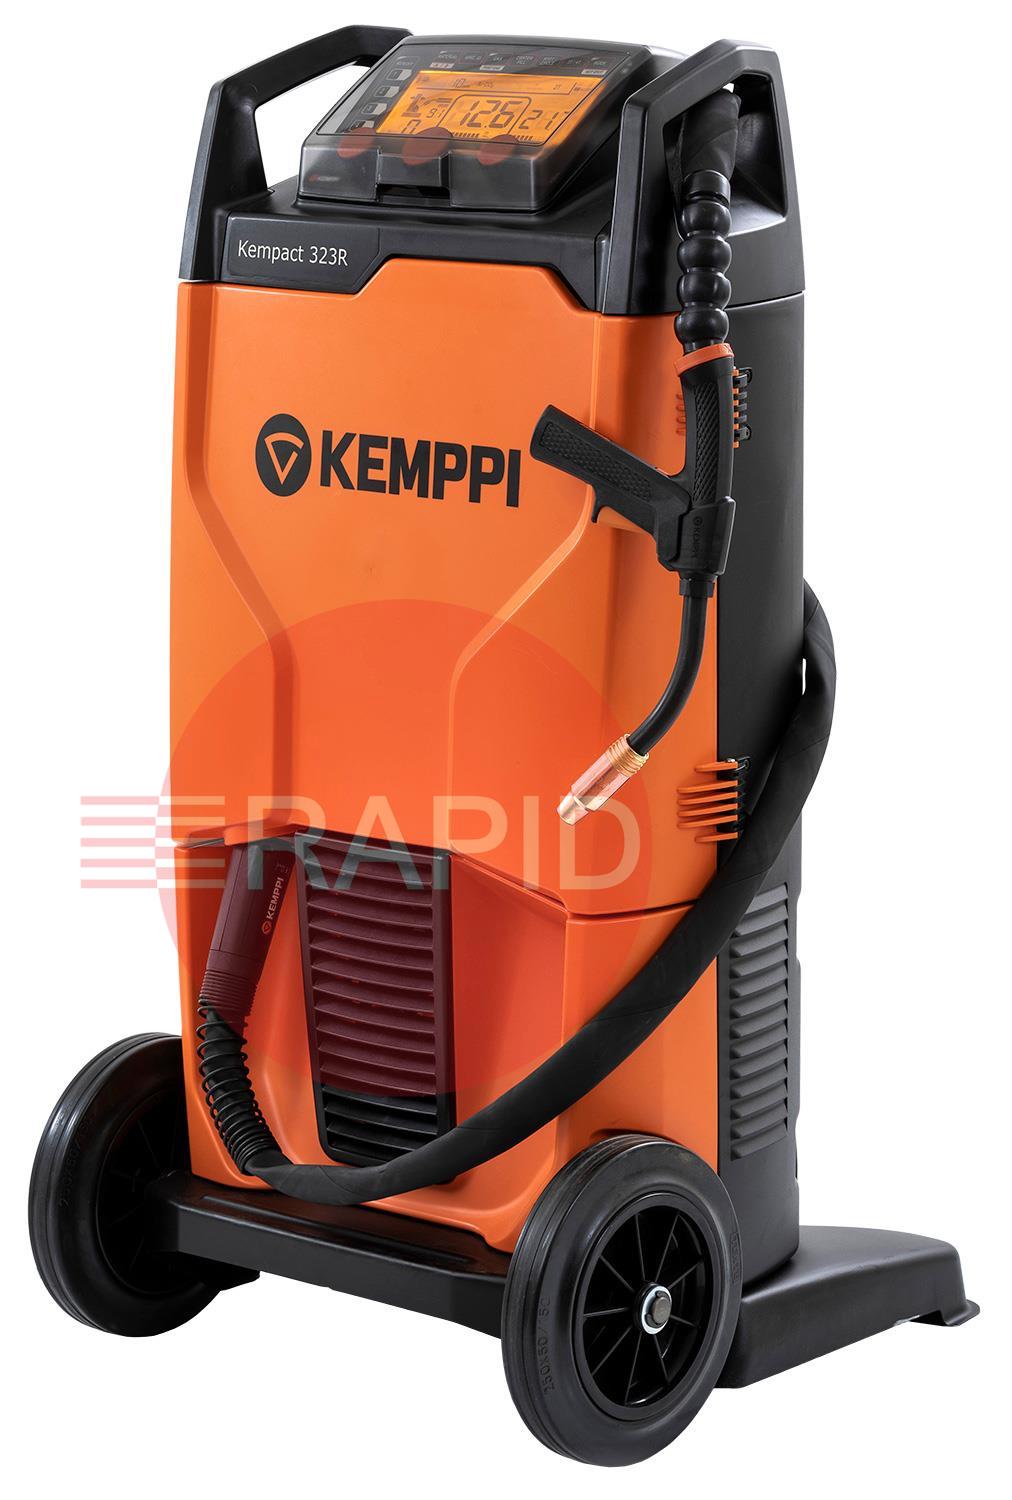 P2212GXE  Kemppi Kempact RA 323R, 320A 3 Phase 400v Mig Welder, with Flexlite GXe 405G 5.0m Torch